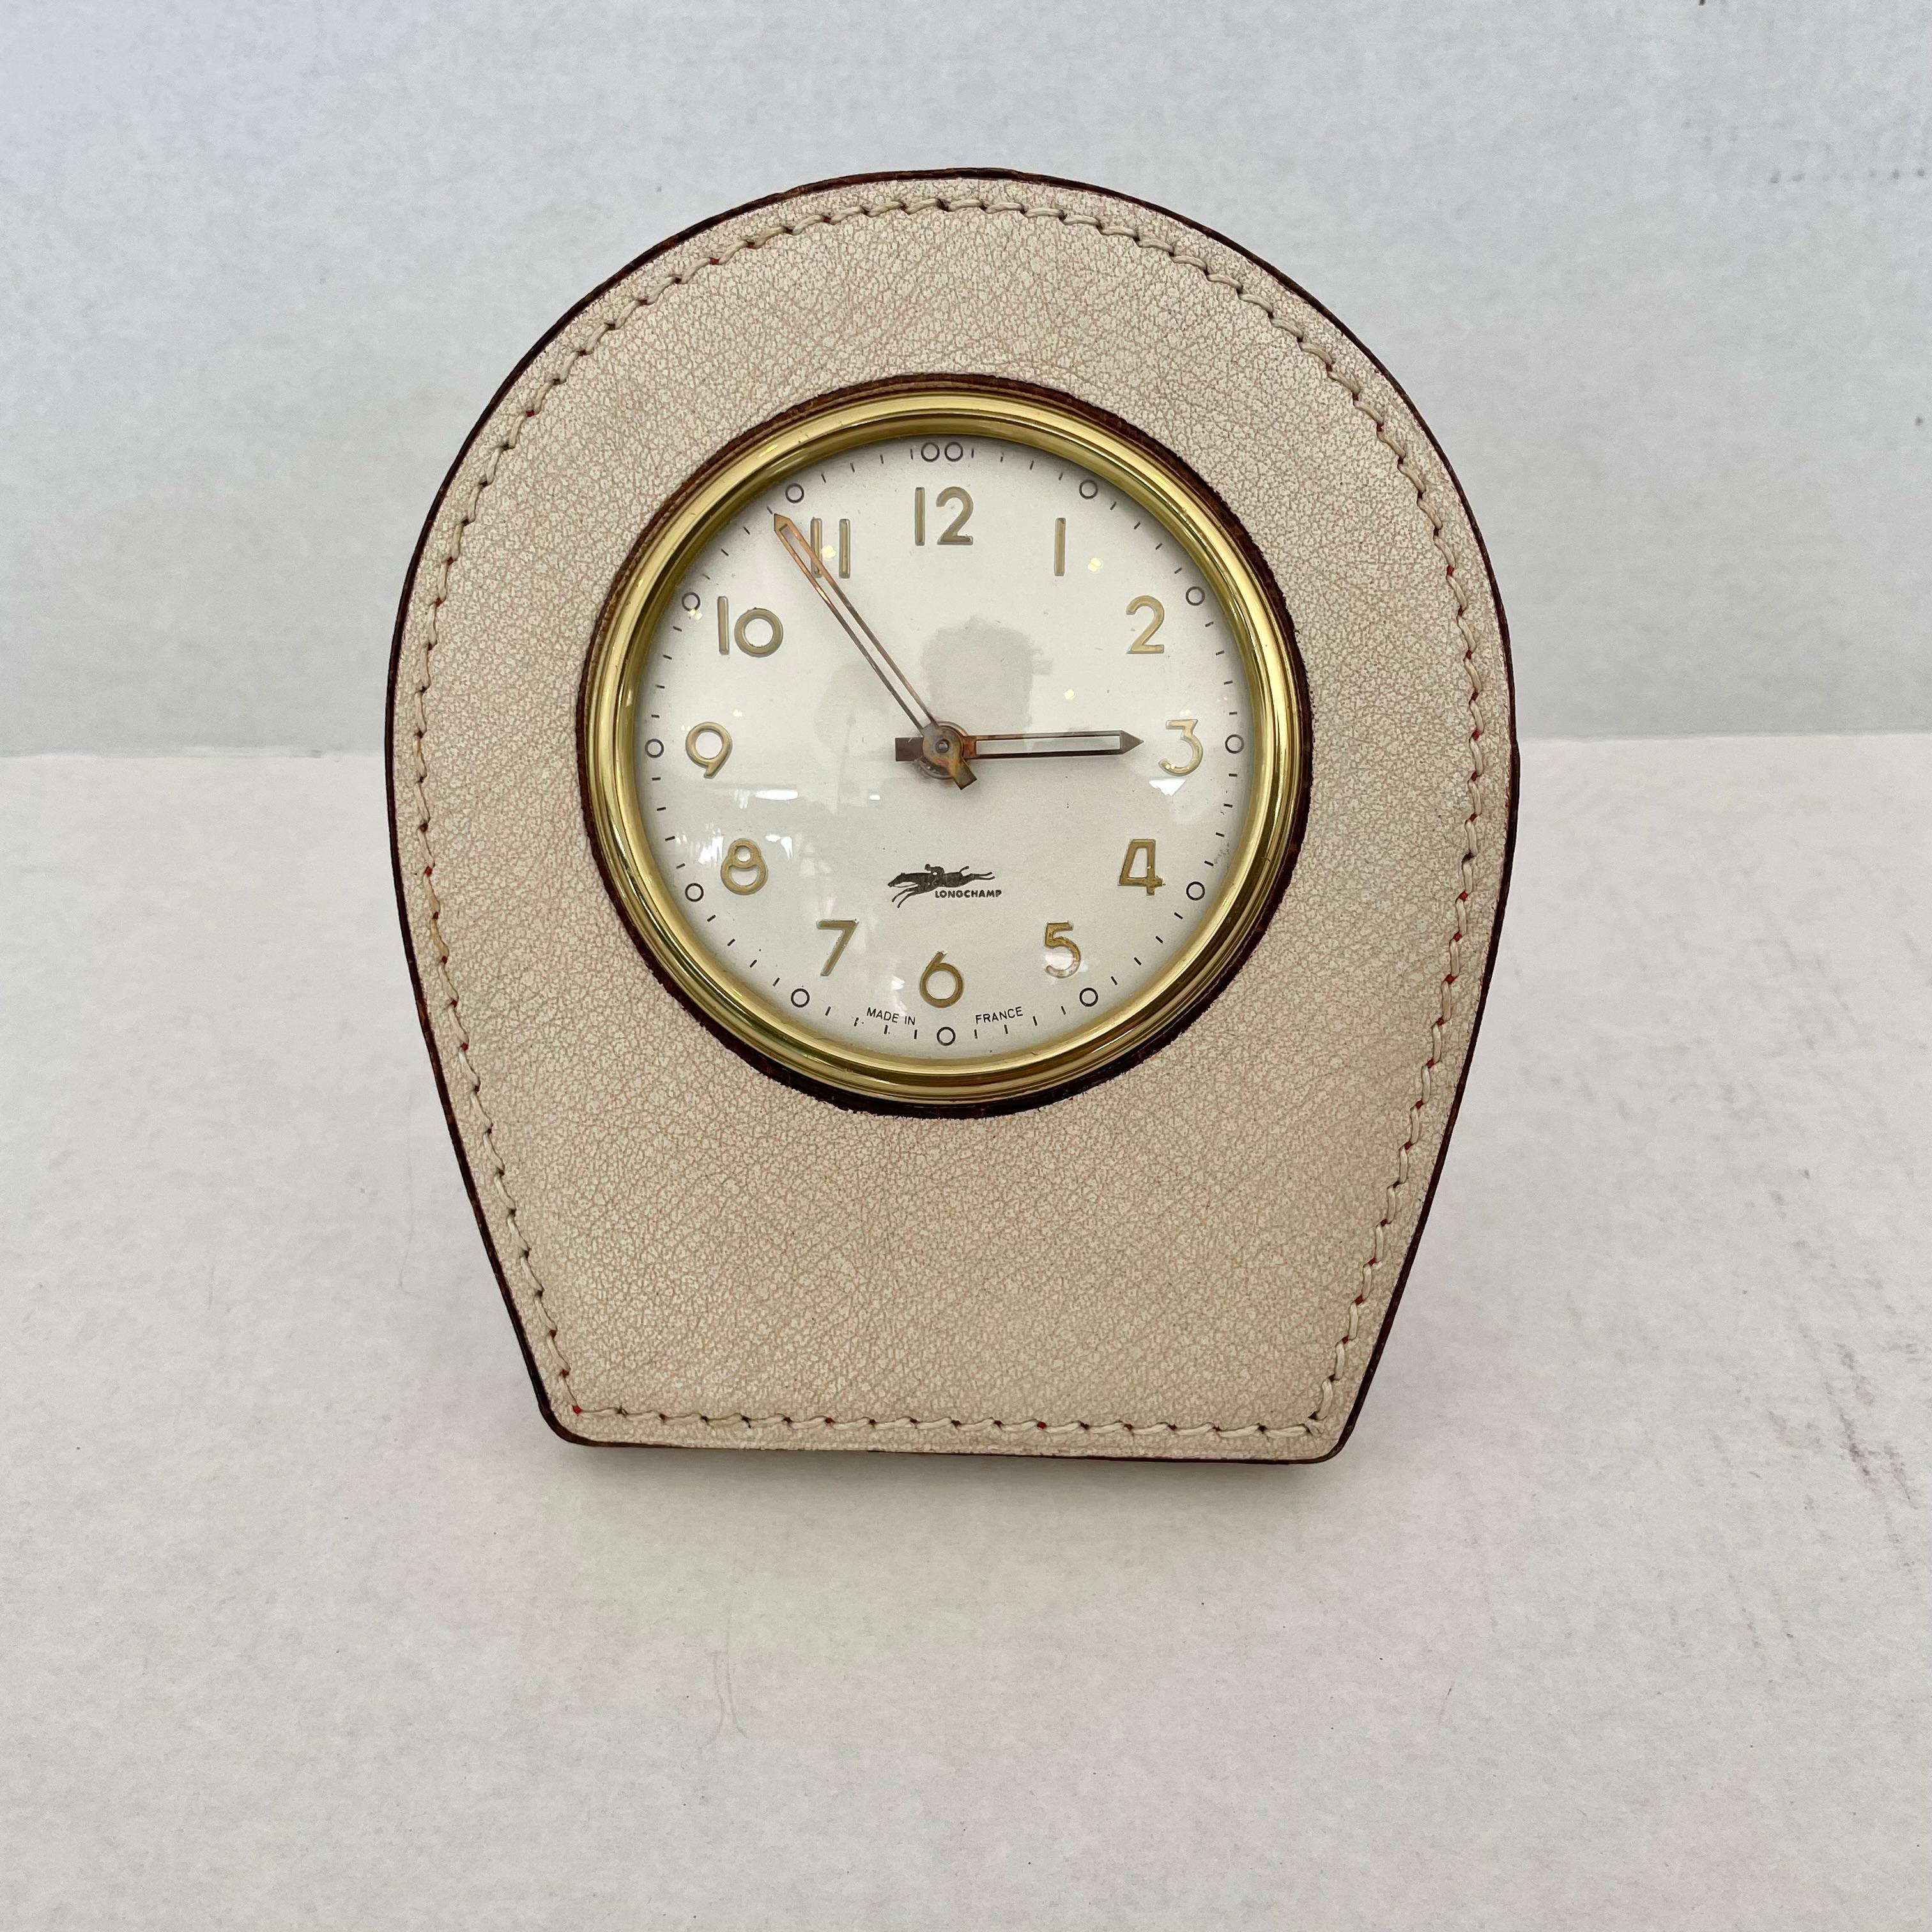 Handsome French leather desk clock by Longchamp. Keeps good time. Winds in the back and has an exposed knob to set time. Excellent patina to cream leather. Great vintage condition.